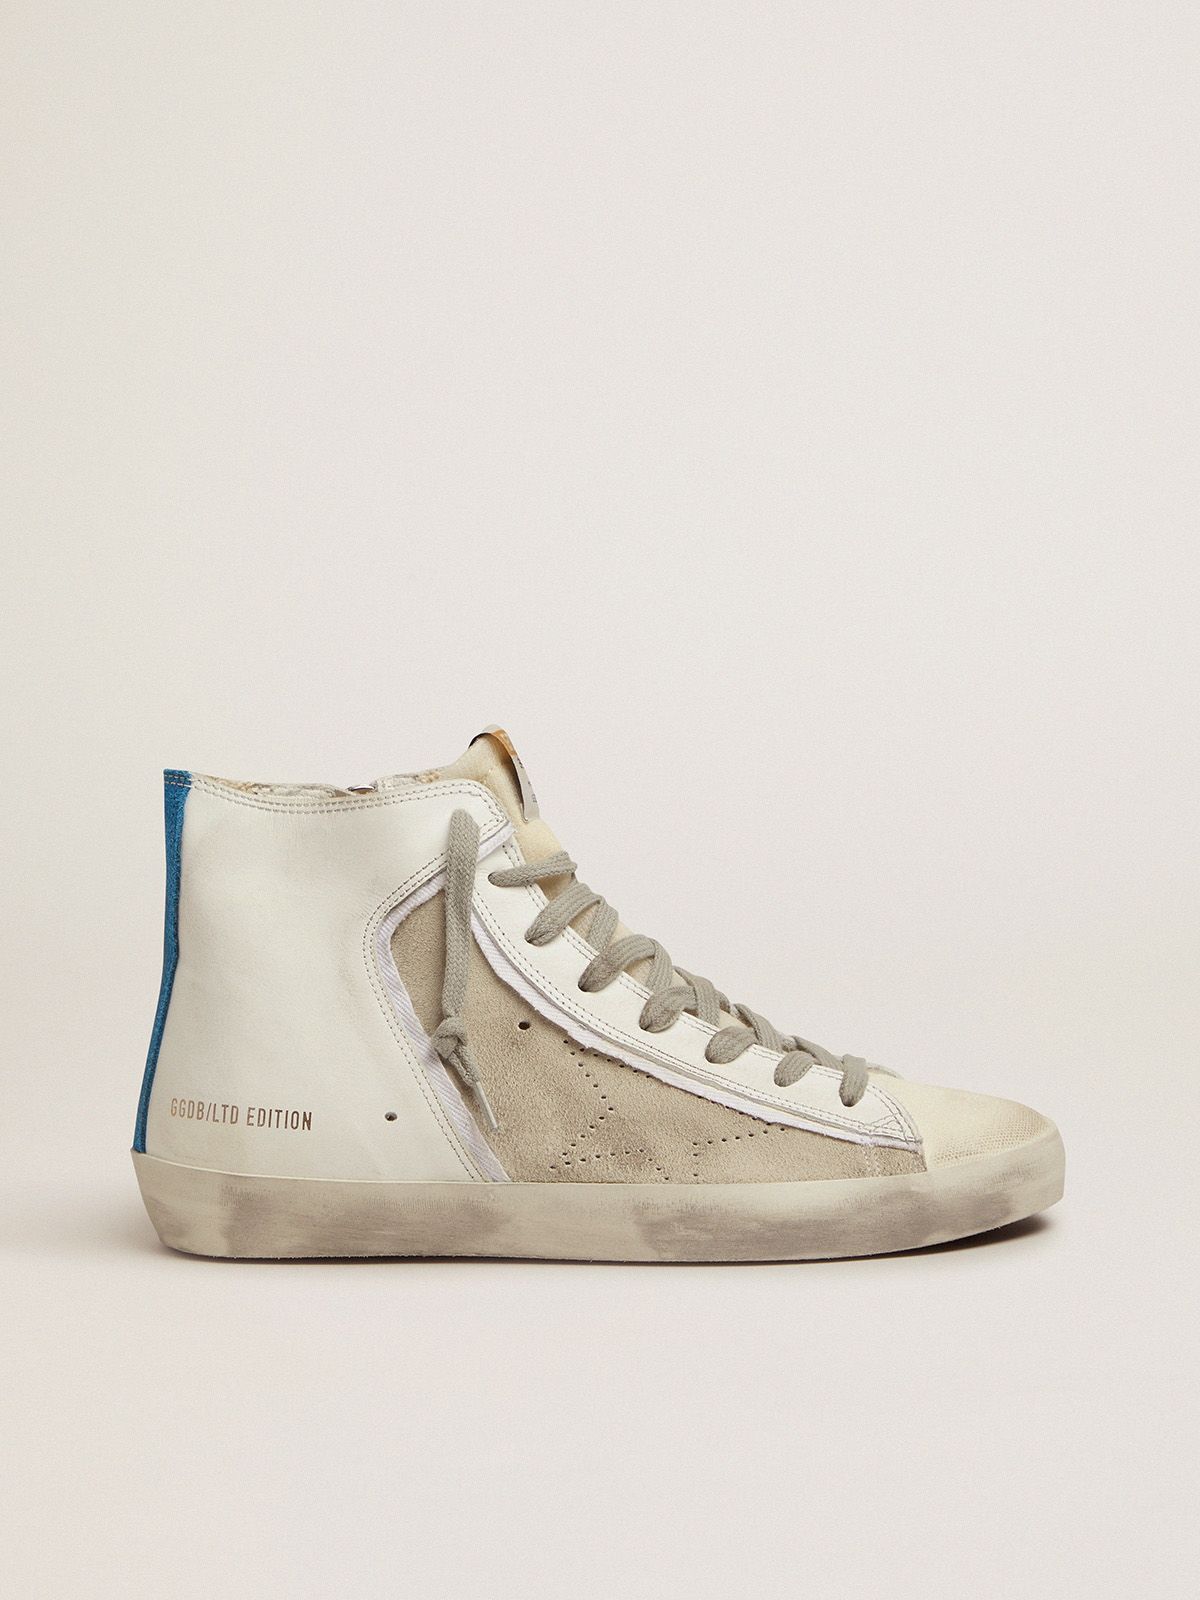 Golden Goose Uomo Saldi Women's Limited Edition blue and white Francy sneakers